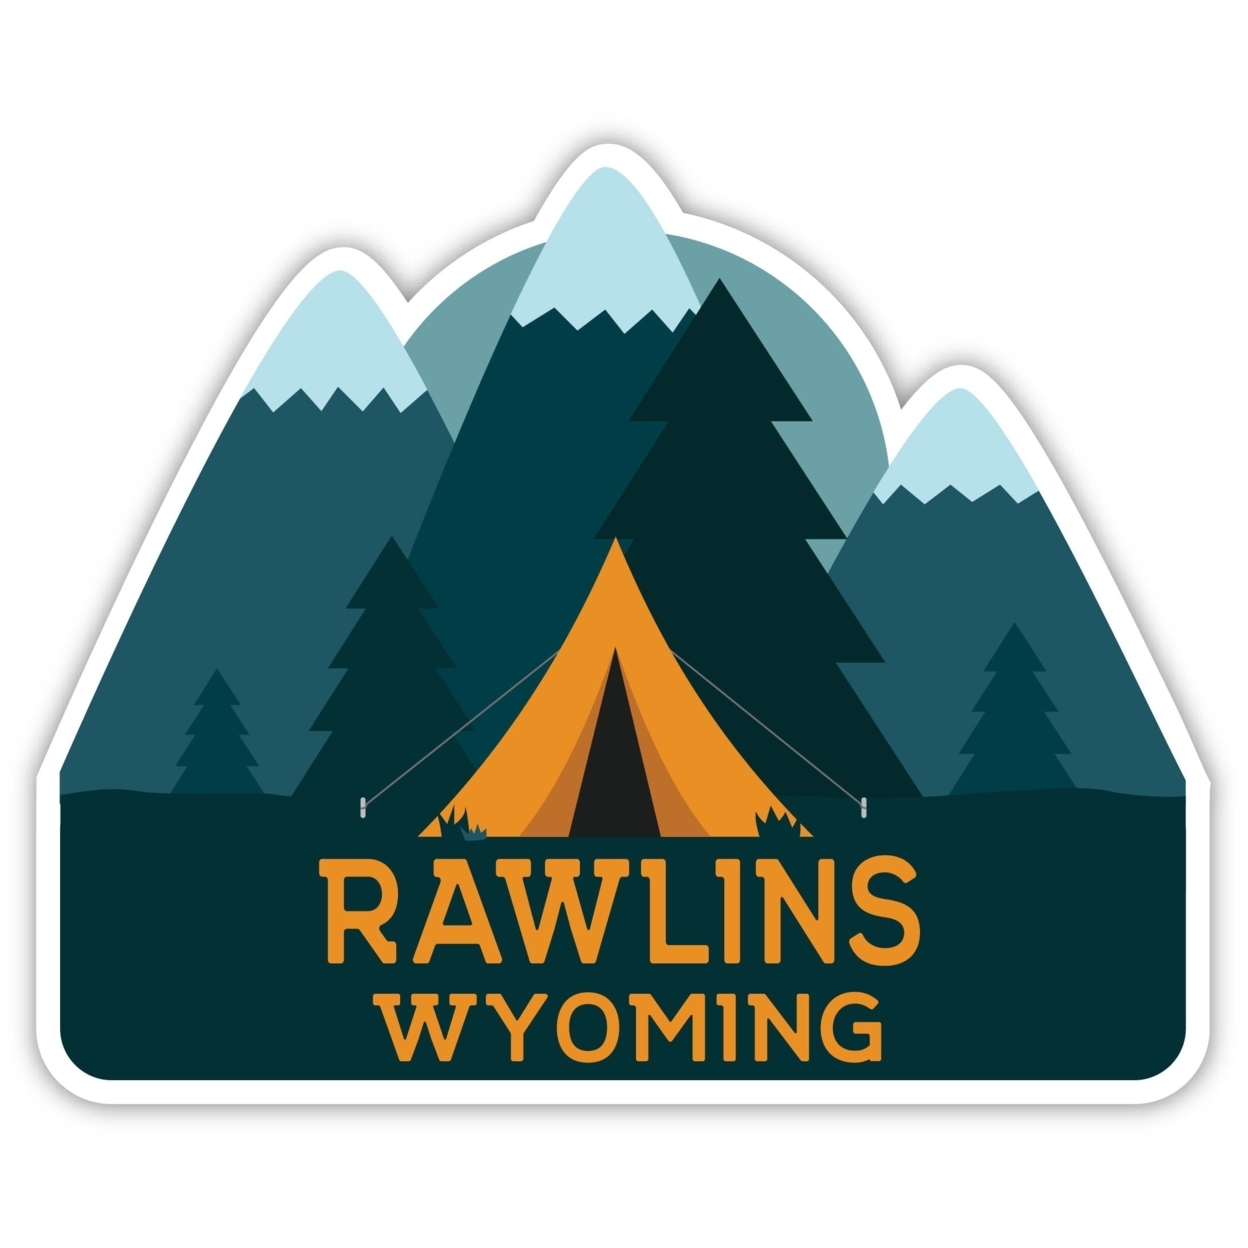 Rawlins Wyoming Souvenir Decorative Stickers (Choose Theme And Size) - Single Unit, 4-Inch, Camp Life